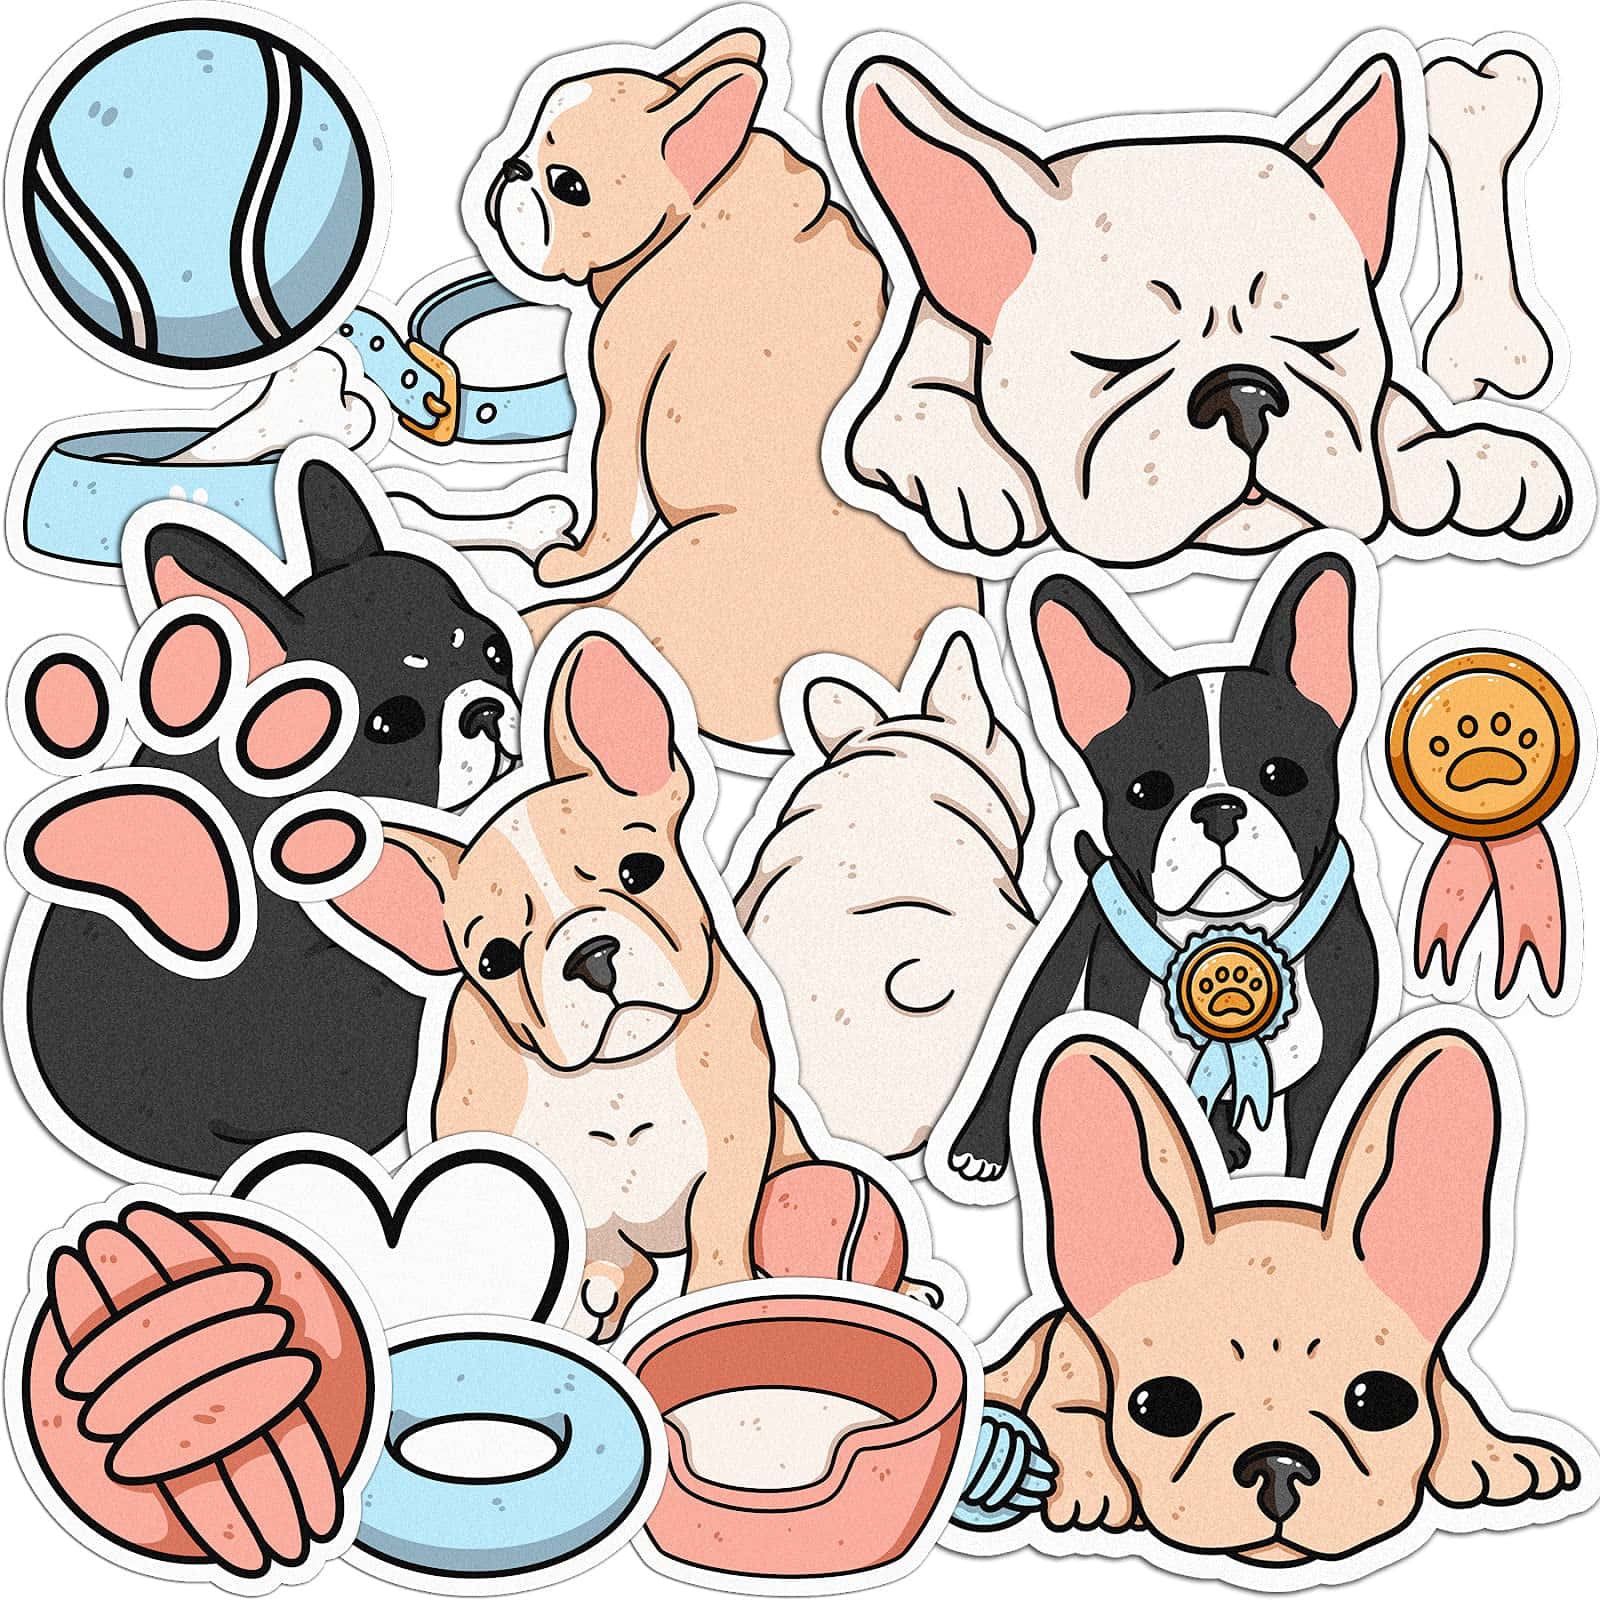 A Playful And Smiling Cartoon Dog Background